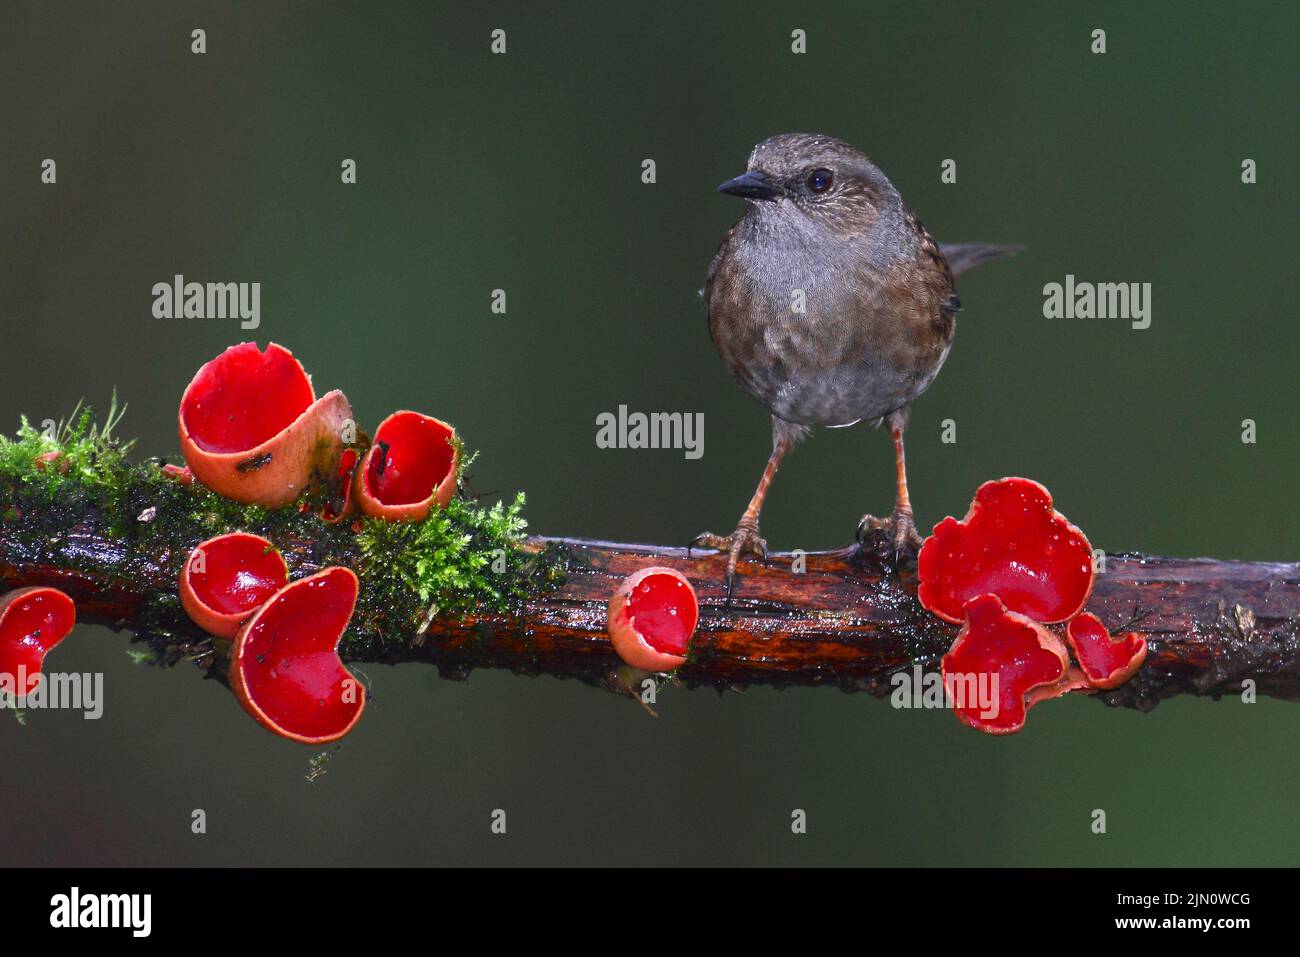 Adult dunnock or hesge sparrow perched on branch Stock Photo